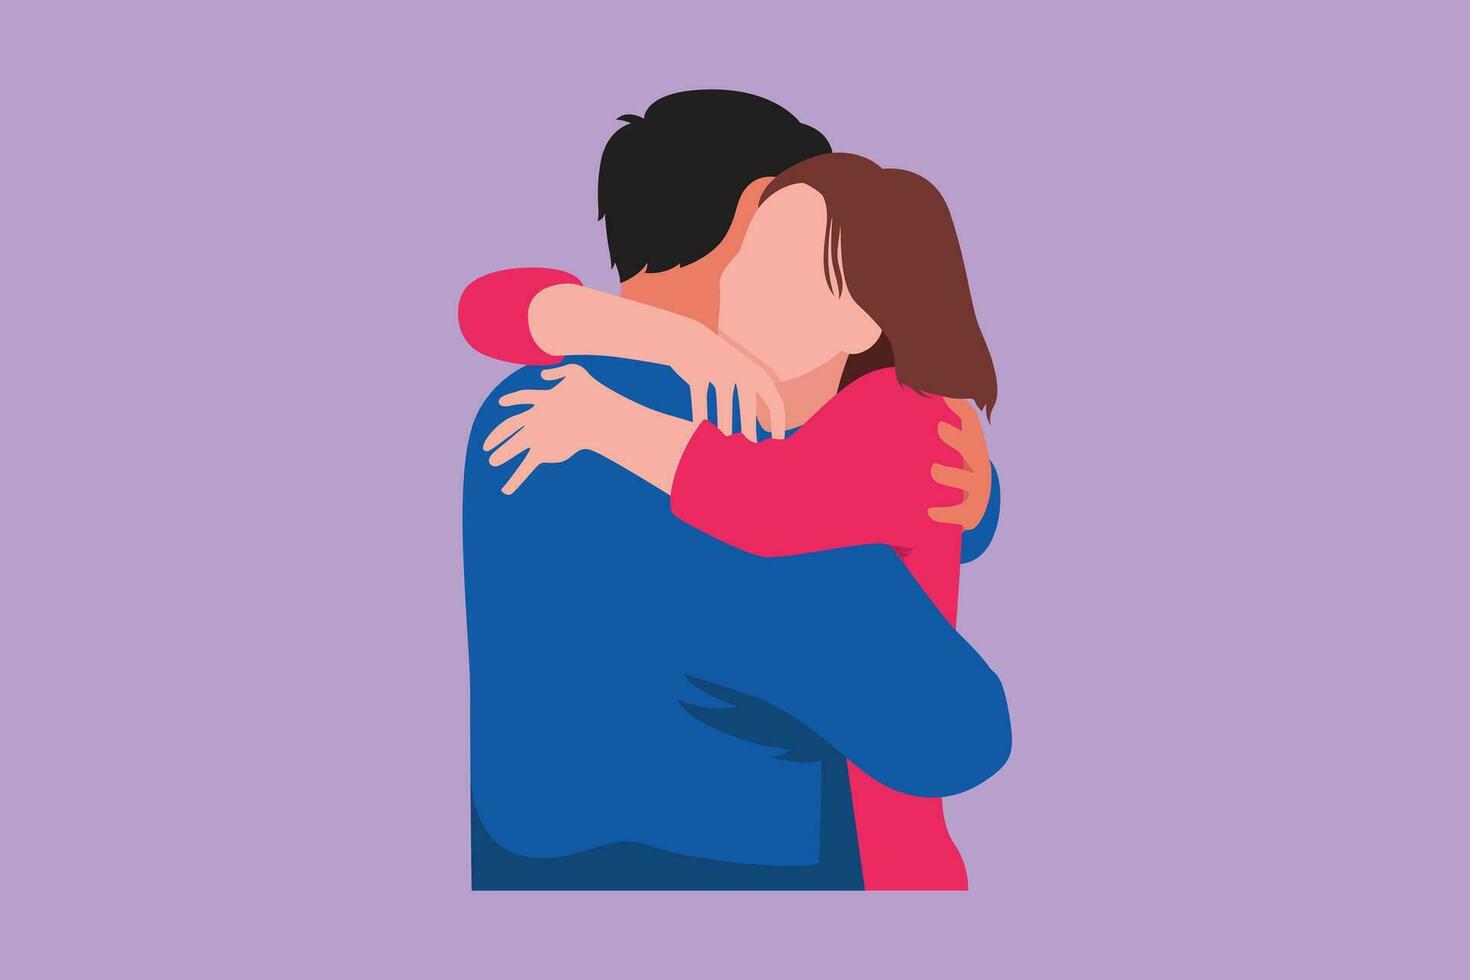 Cartoon flat style drawing pretty girl is hugging boy with smile. Cheerful man hugging and embracing woman. Romantic couple dating characters. Happy family concept. Graphic design vector illustration